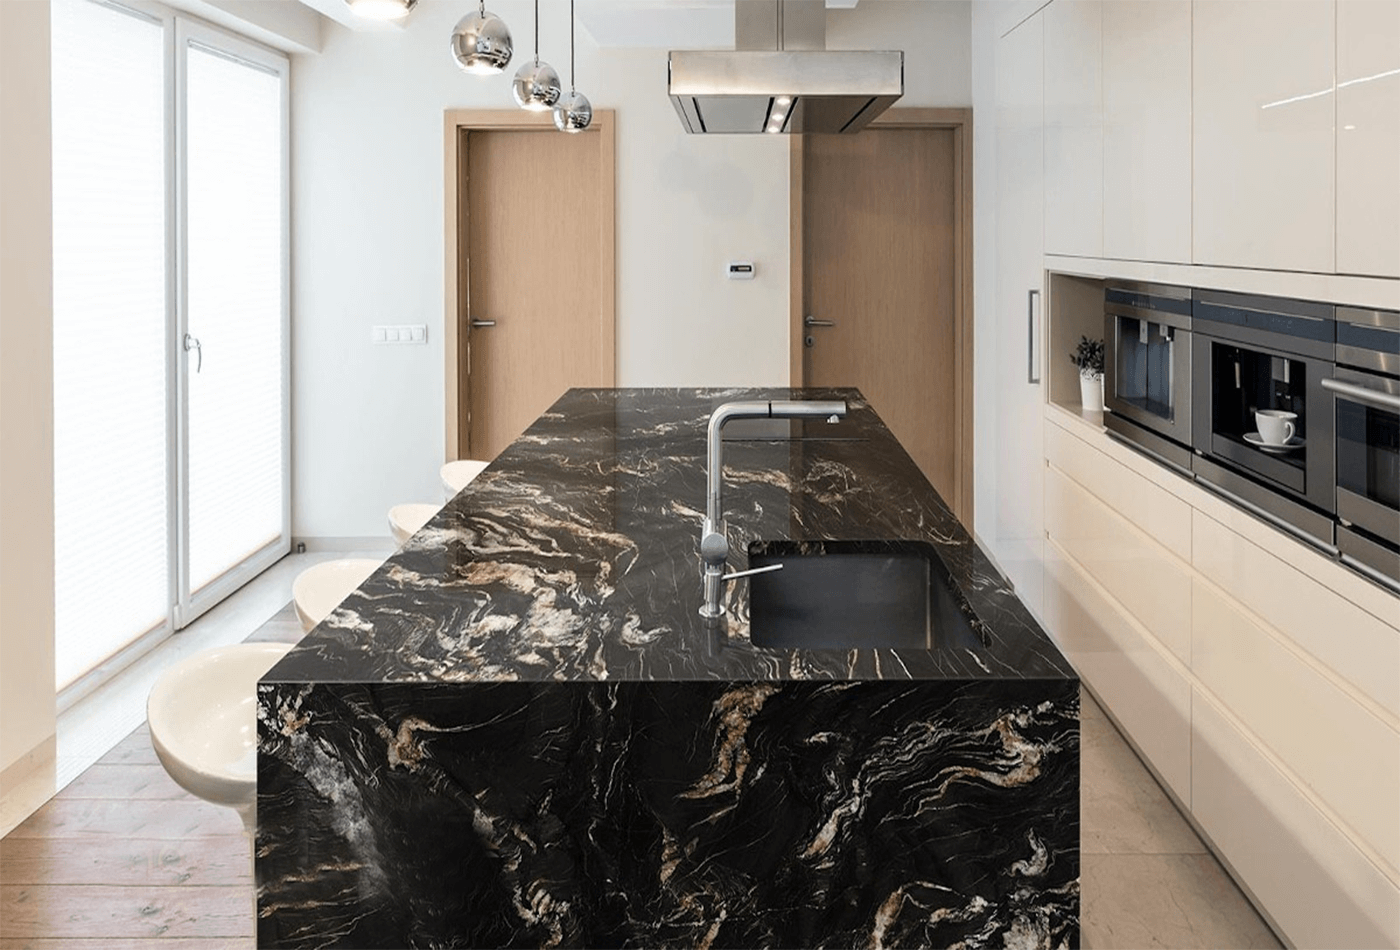 Top Quality Belvedere Granite in Black from Work-tops.com